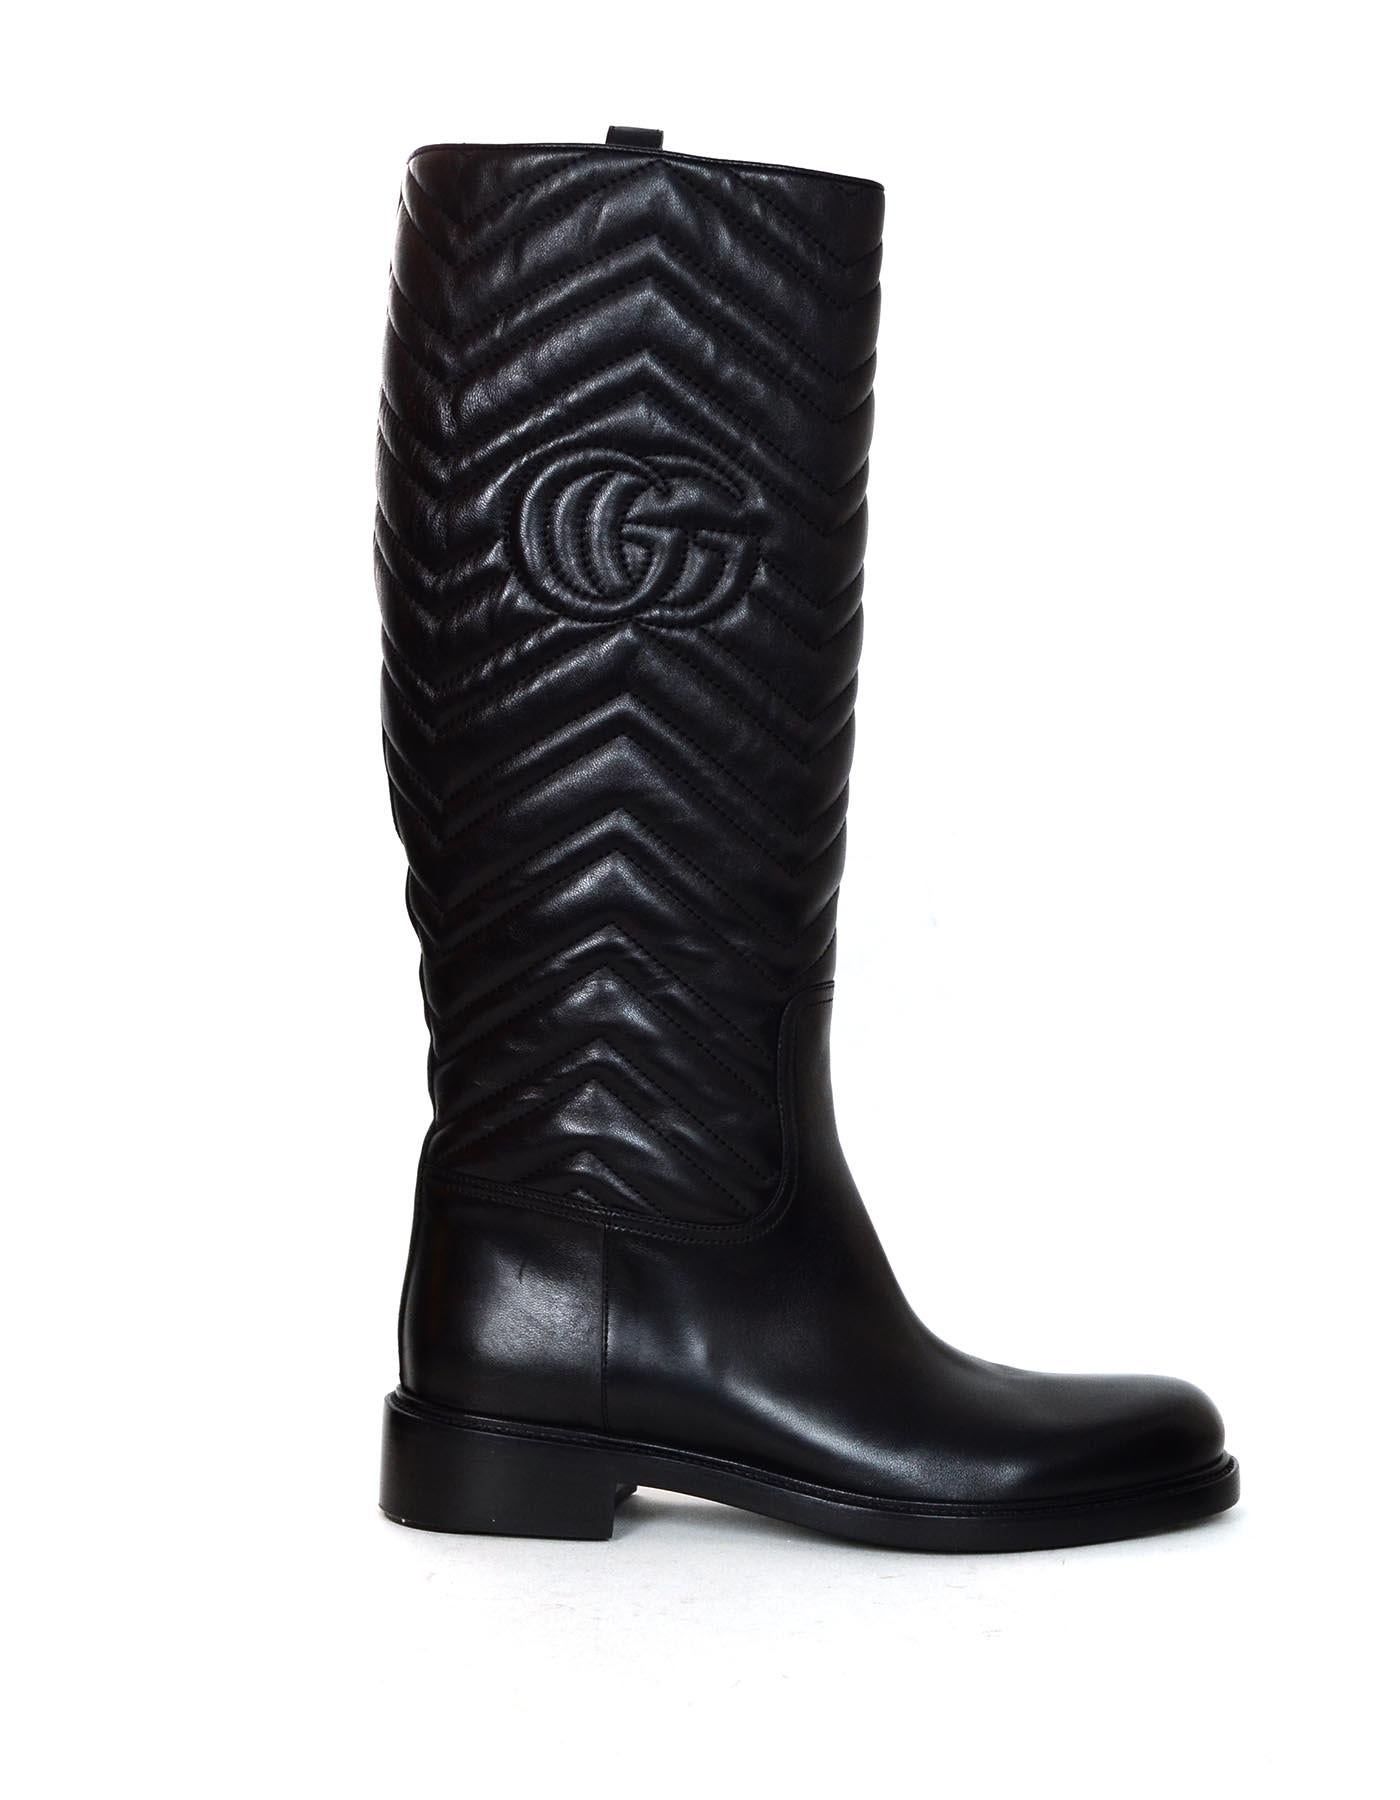 Gucci Black Matlasse Quilted Nappa Charlotte Knee High Riding Boots Sz 41 W/ Box

Made In: Italy
Year of Production: 
Color: Black
Materials: Nappa leather
Closure/Opening: Pull on
Overall Condition: Excellent pre-owned condition with minor